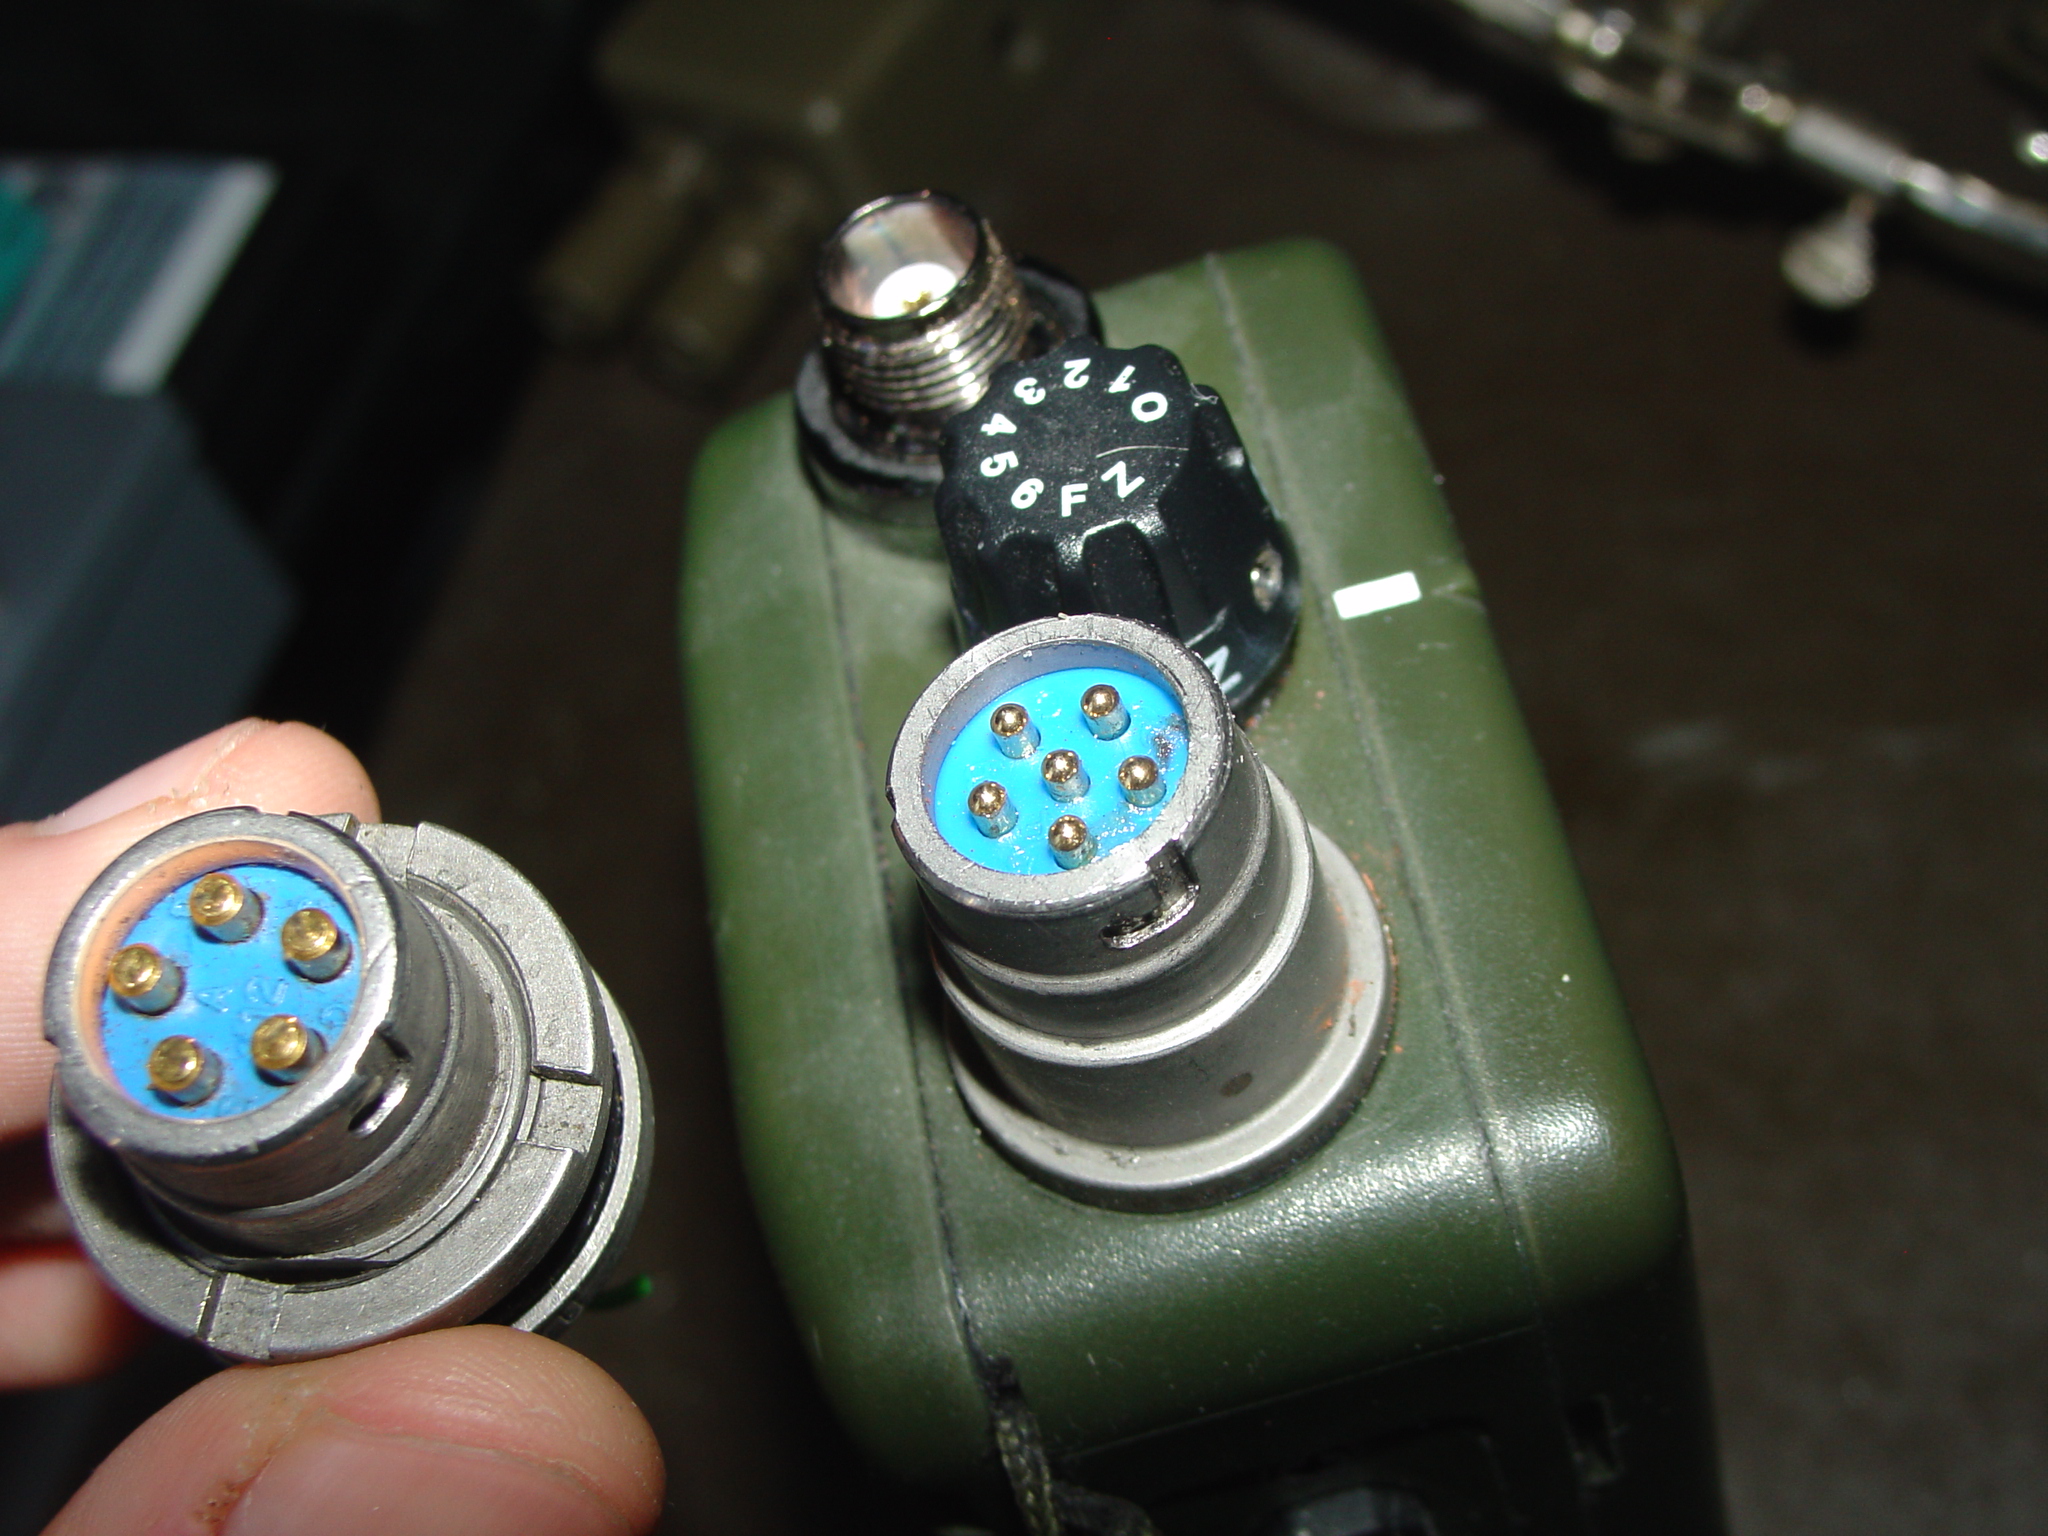 TRI PRC 152 inside pictures and compare real army microphone connector.